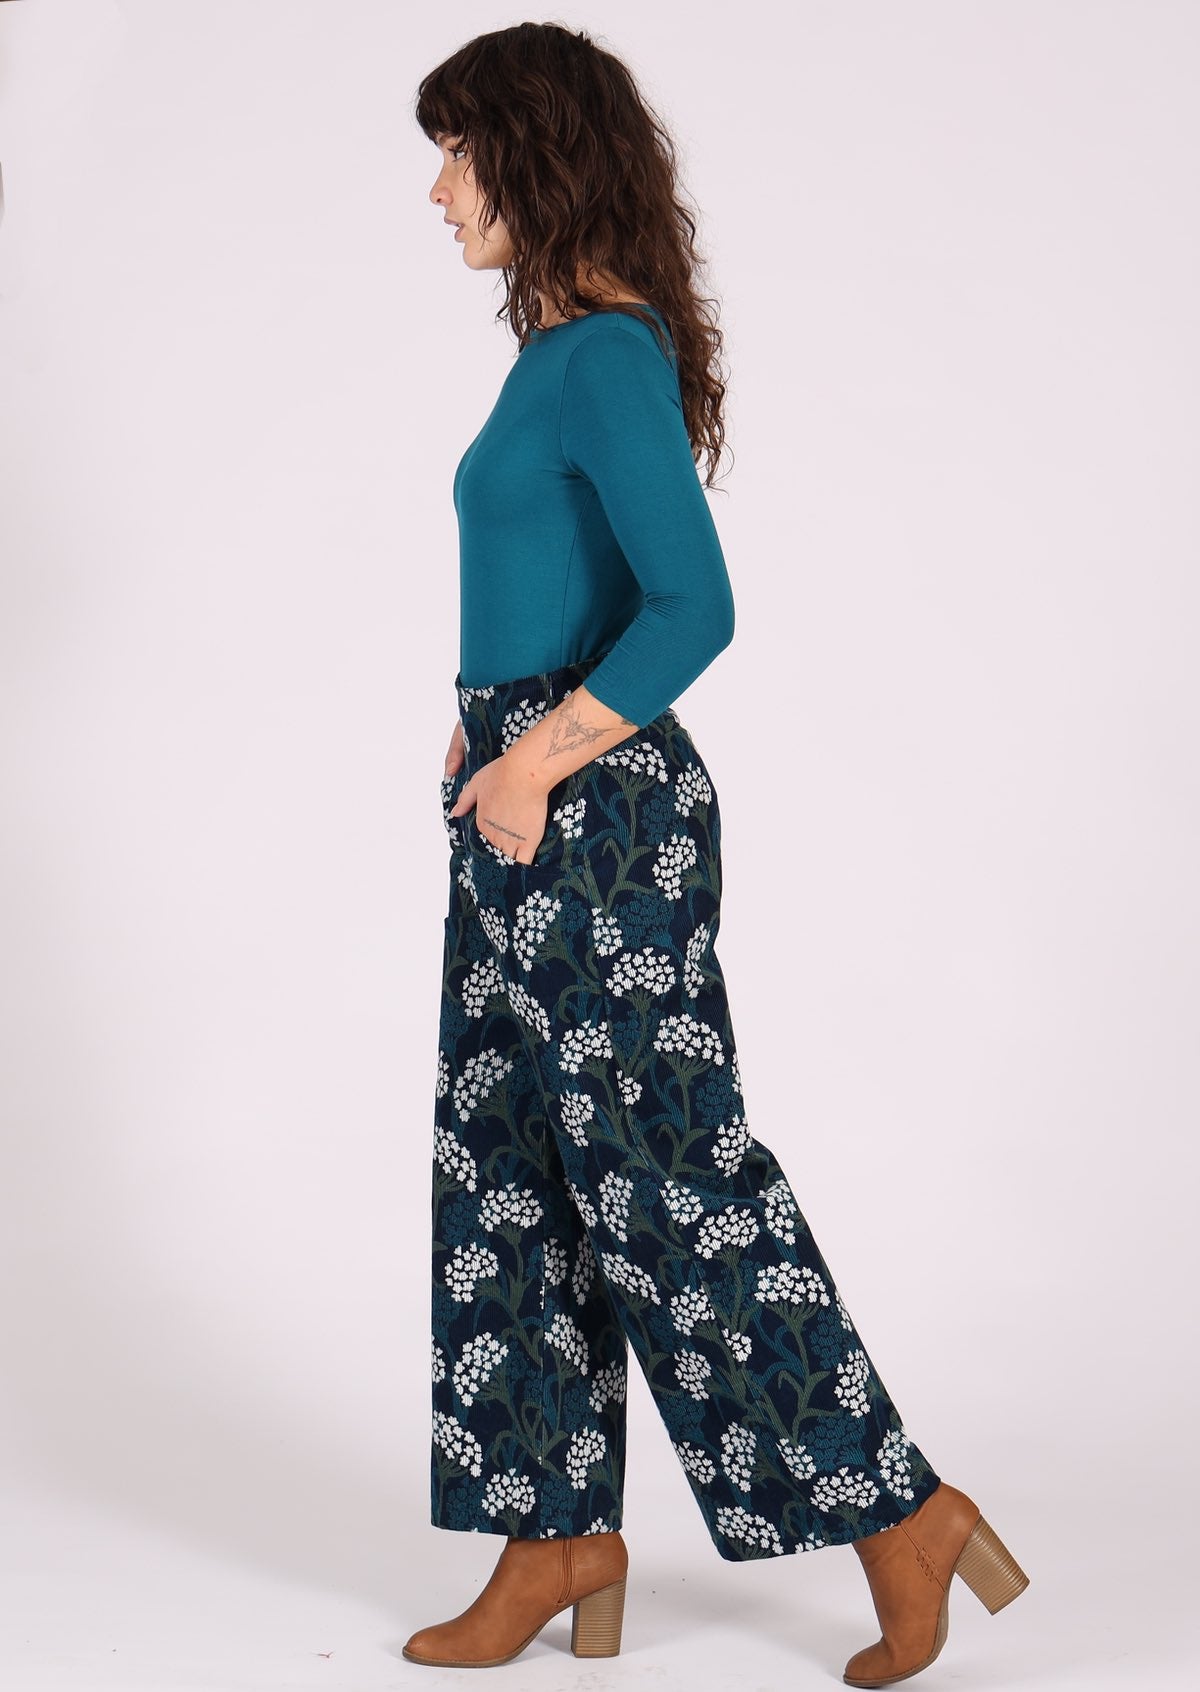 High waisted wide legged corduroy pants with floral print